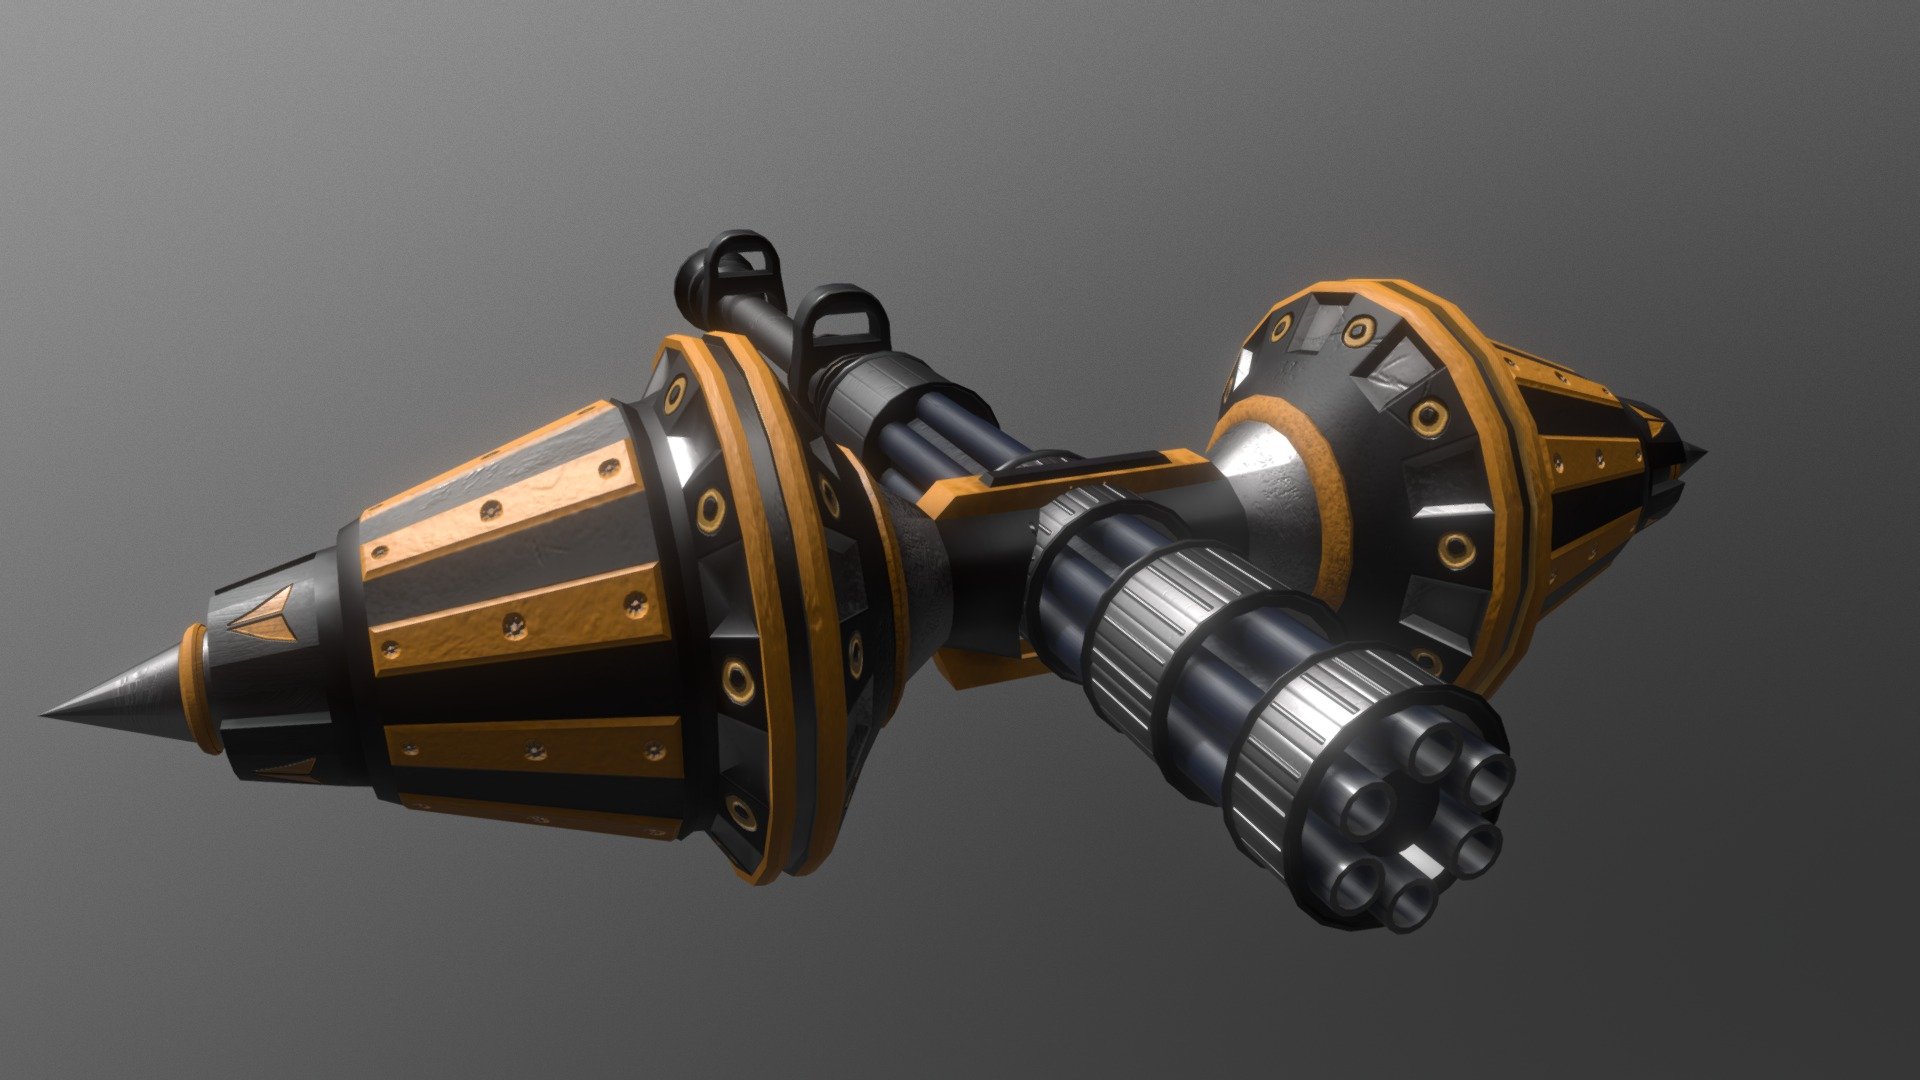 With a polycount range of 4000-6000, the purpose of this project was to create a weapon that incorporated both a melee and a ranged attack function. The weapon I have created is a sci-fi fusion of a Gatling gun and an oversized, two-handed hammer. I wanted to create a weapon that felt weighty and intimidating. The textures include artificial materials to give it a futuristic look, with some more traditional metal on the gun barrel sections.

Modeled in Maya and textured in Subtance Painter - Gatling Hammer - 3D model by Andrew Adams (@amadams1) 3d model